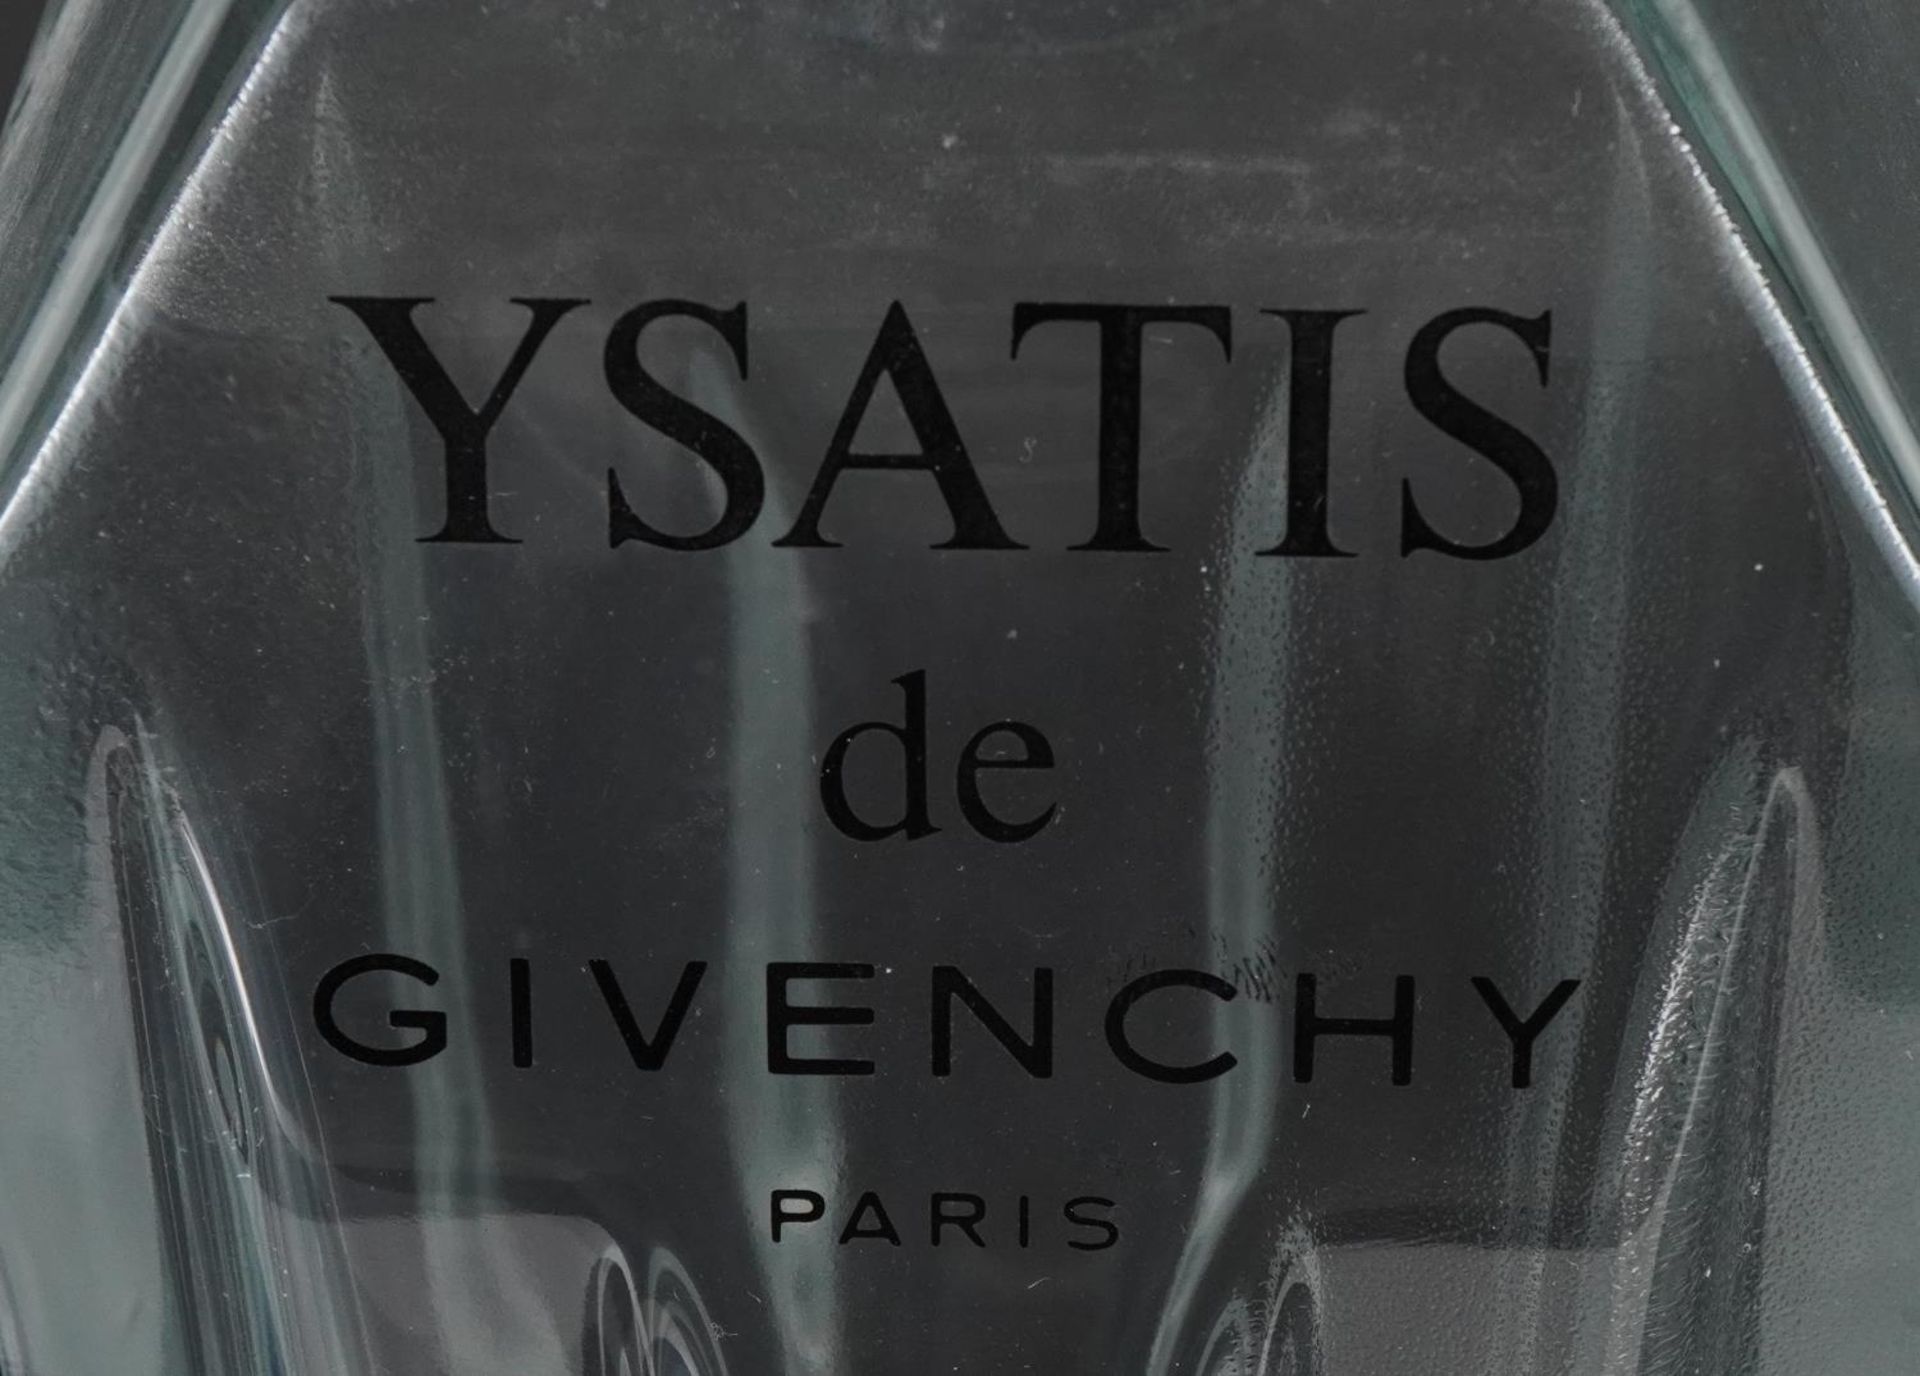 Large Givenchy Ysatis advertising shop display dummy perfume bottle, 40cm high : For further - Image 6 of 6